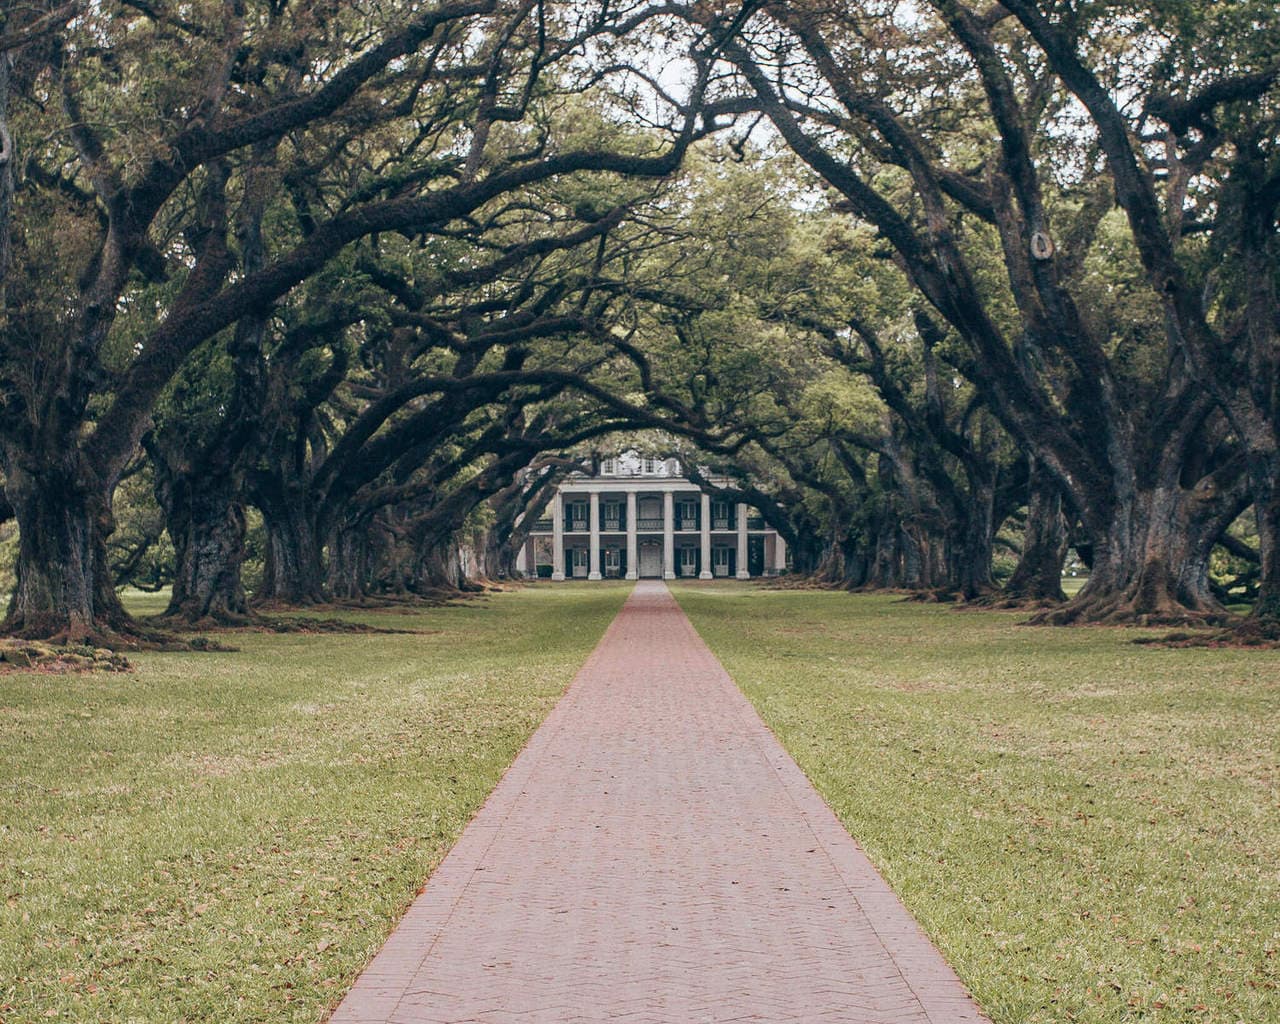 Oak Alley Plantation is one of the most popular things to do in New Orleans. Click here for a full 4 day New Orleans itinerary + map. #neworleans #oakalleyplantation | New Orleans houses | New Orleans plantations | New Orleans in 4 Days | 4 Days in New Orleans | New Orleans 4 day itinerary | New Orleans in spring | New Orleans photo spots | New Orleans Louisiana | New Orleans things to do in | what to do in New Orleans